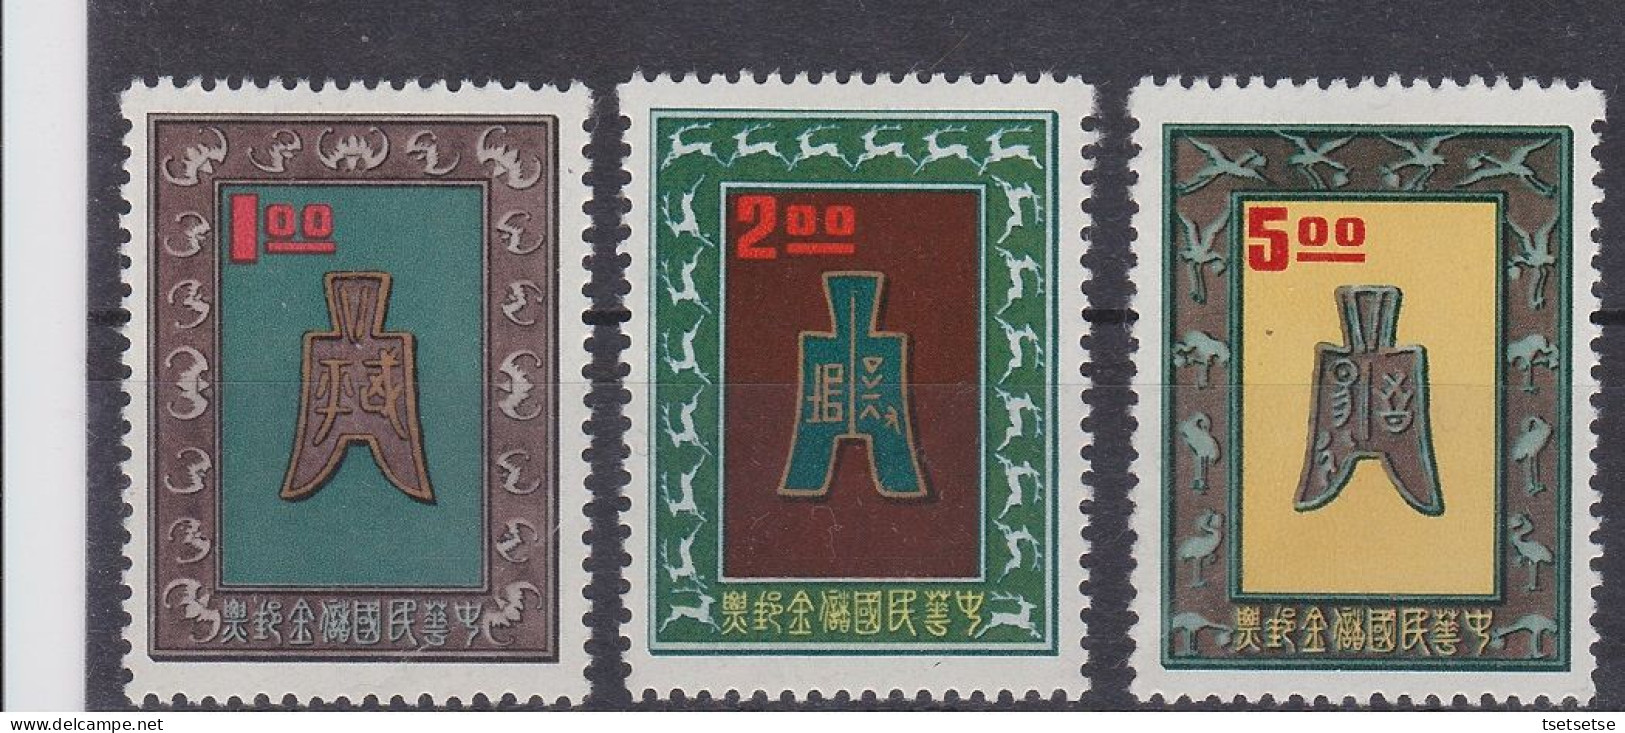 Scarce! 1962 Rep. Of China, Taiwan, Postal Savings Stamps, Set Of 3 Mint Unused, OG, No Stain - Ungebraucht